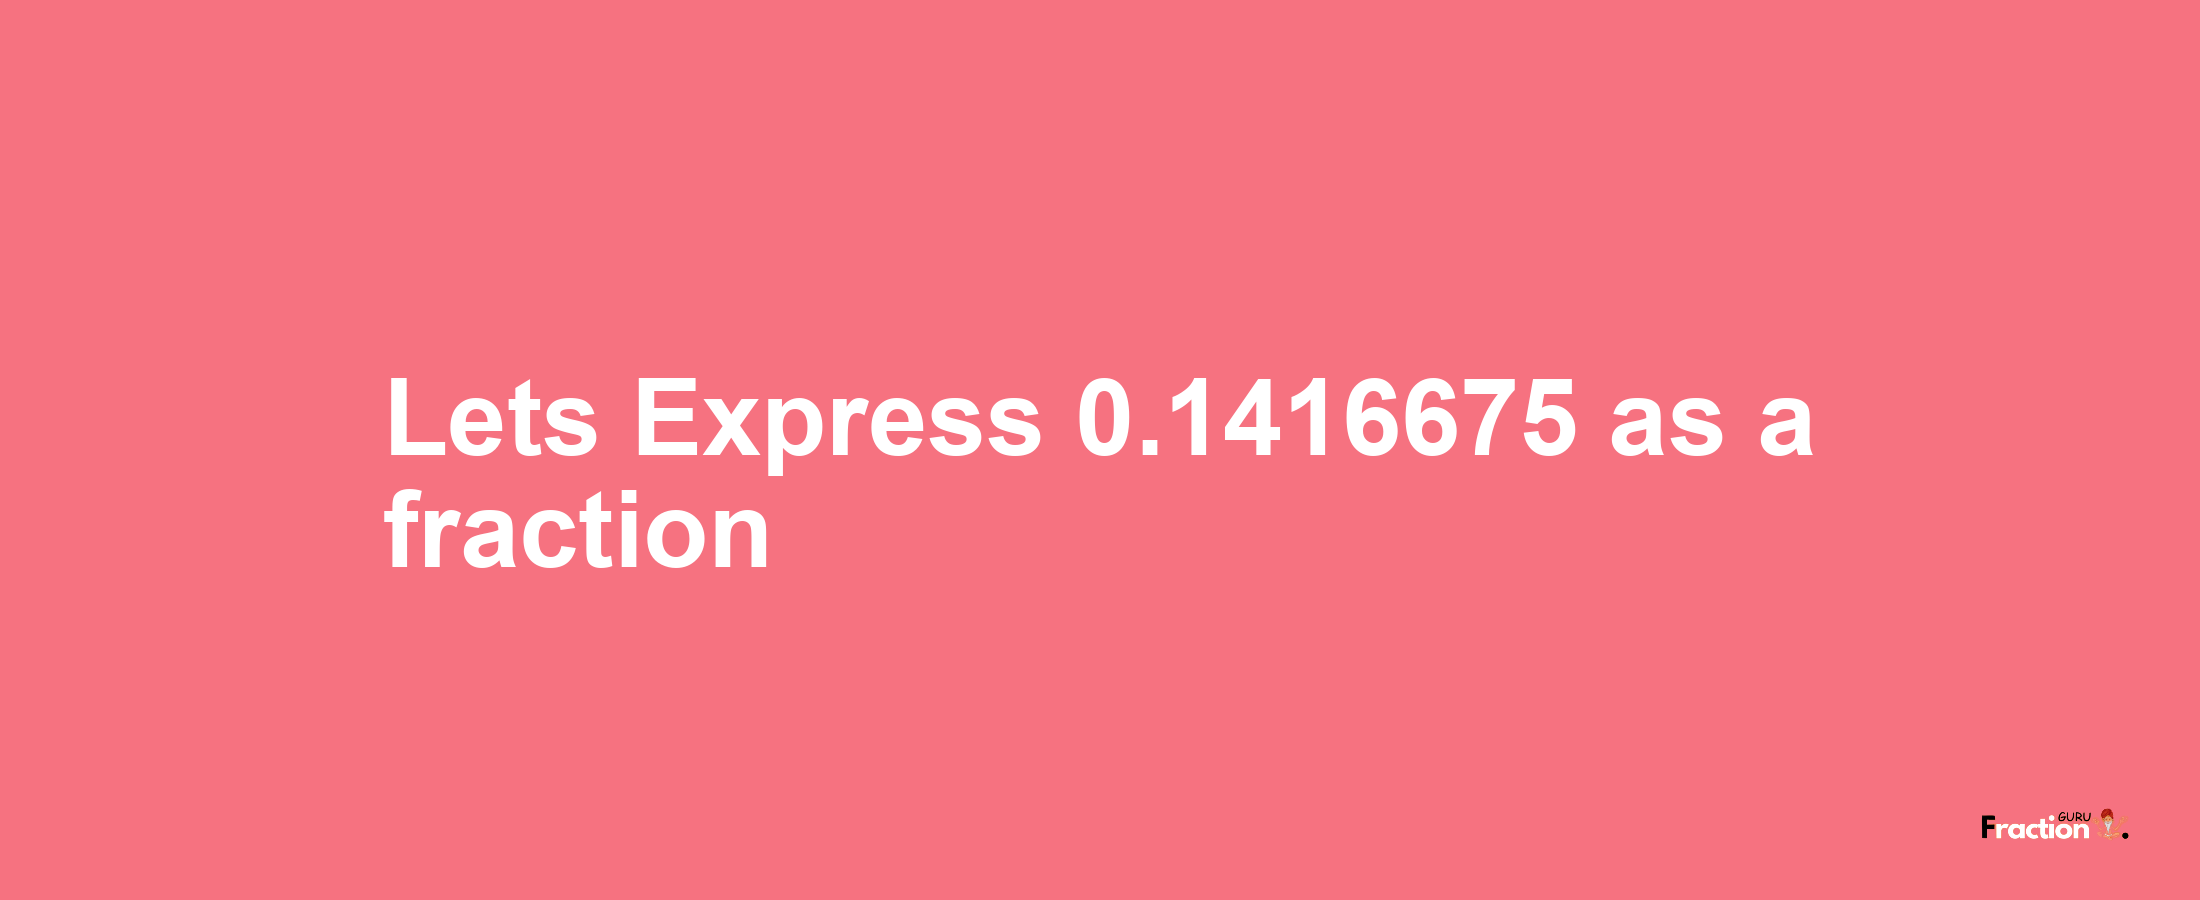 Lets Express 0.1416675 as afraction